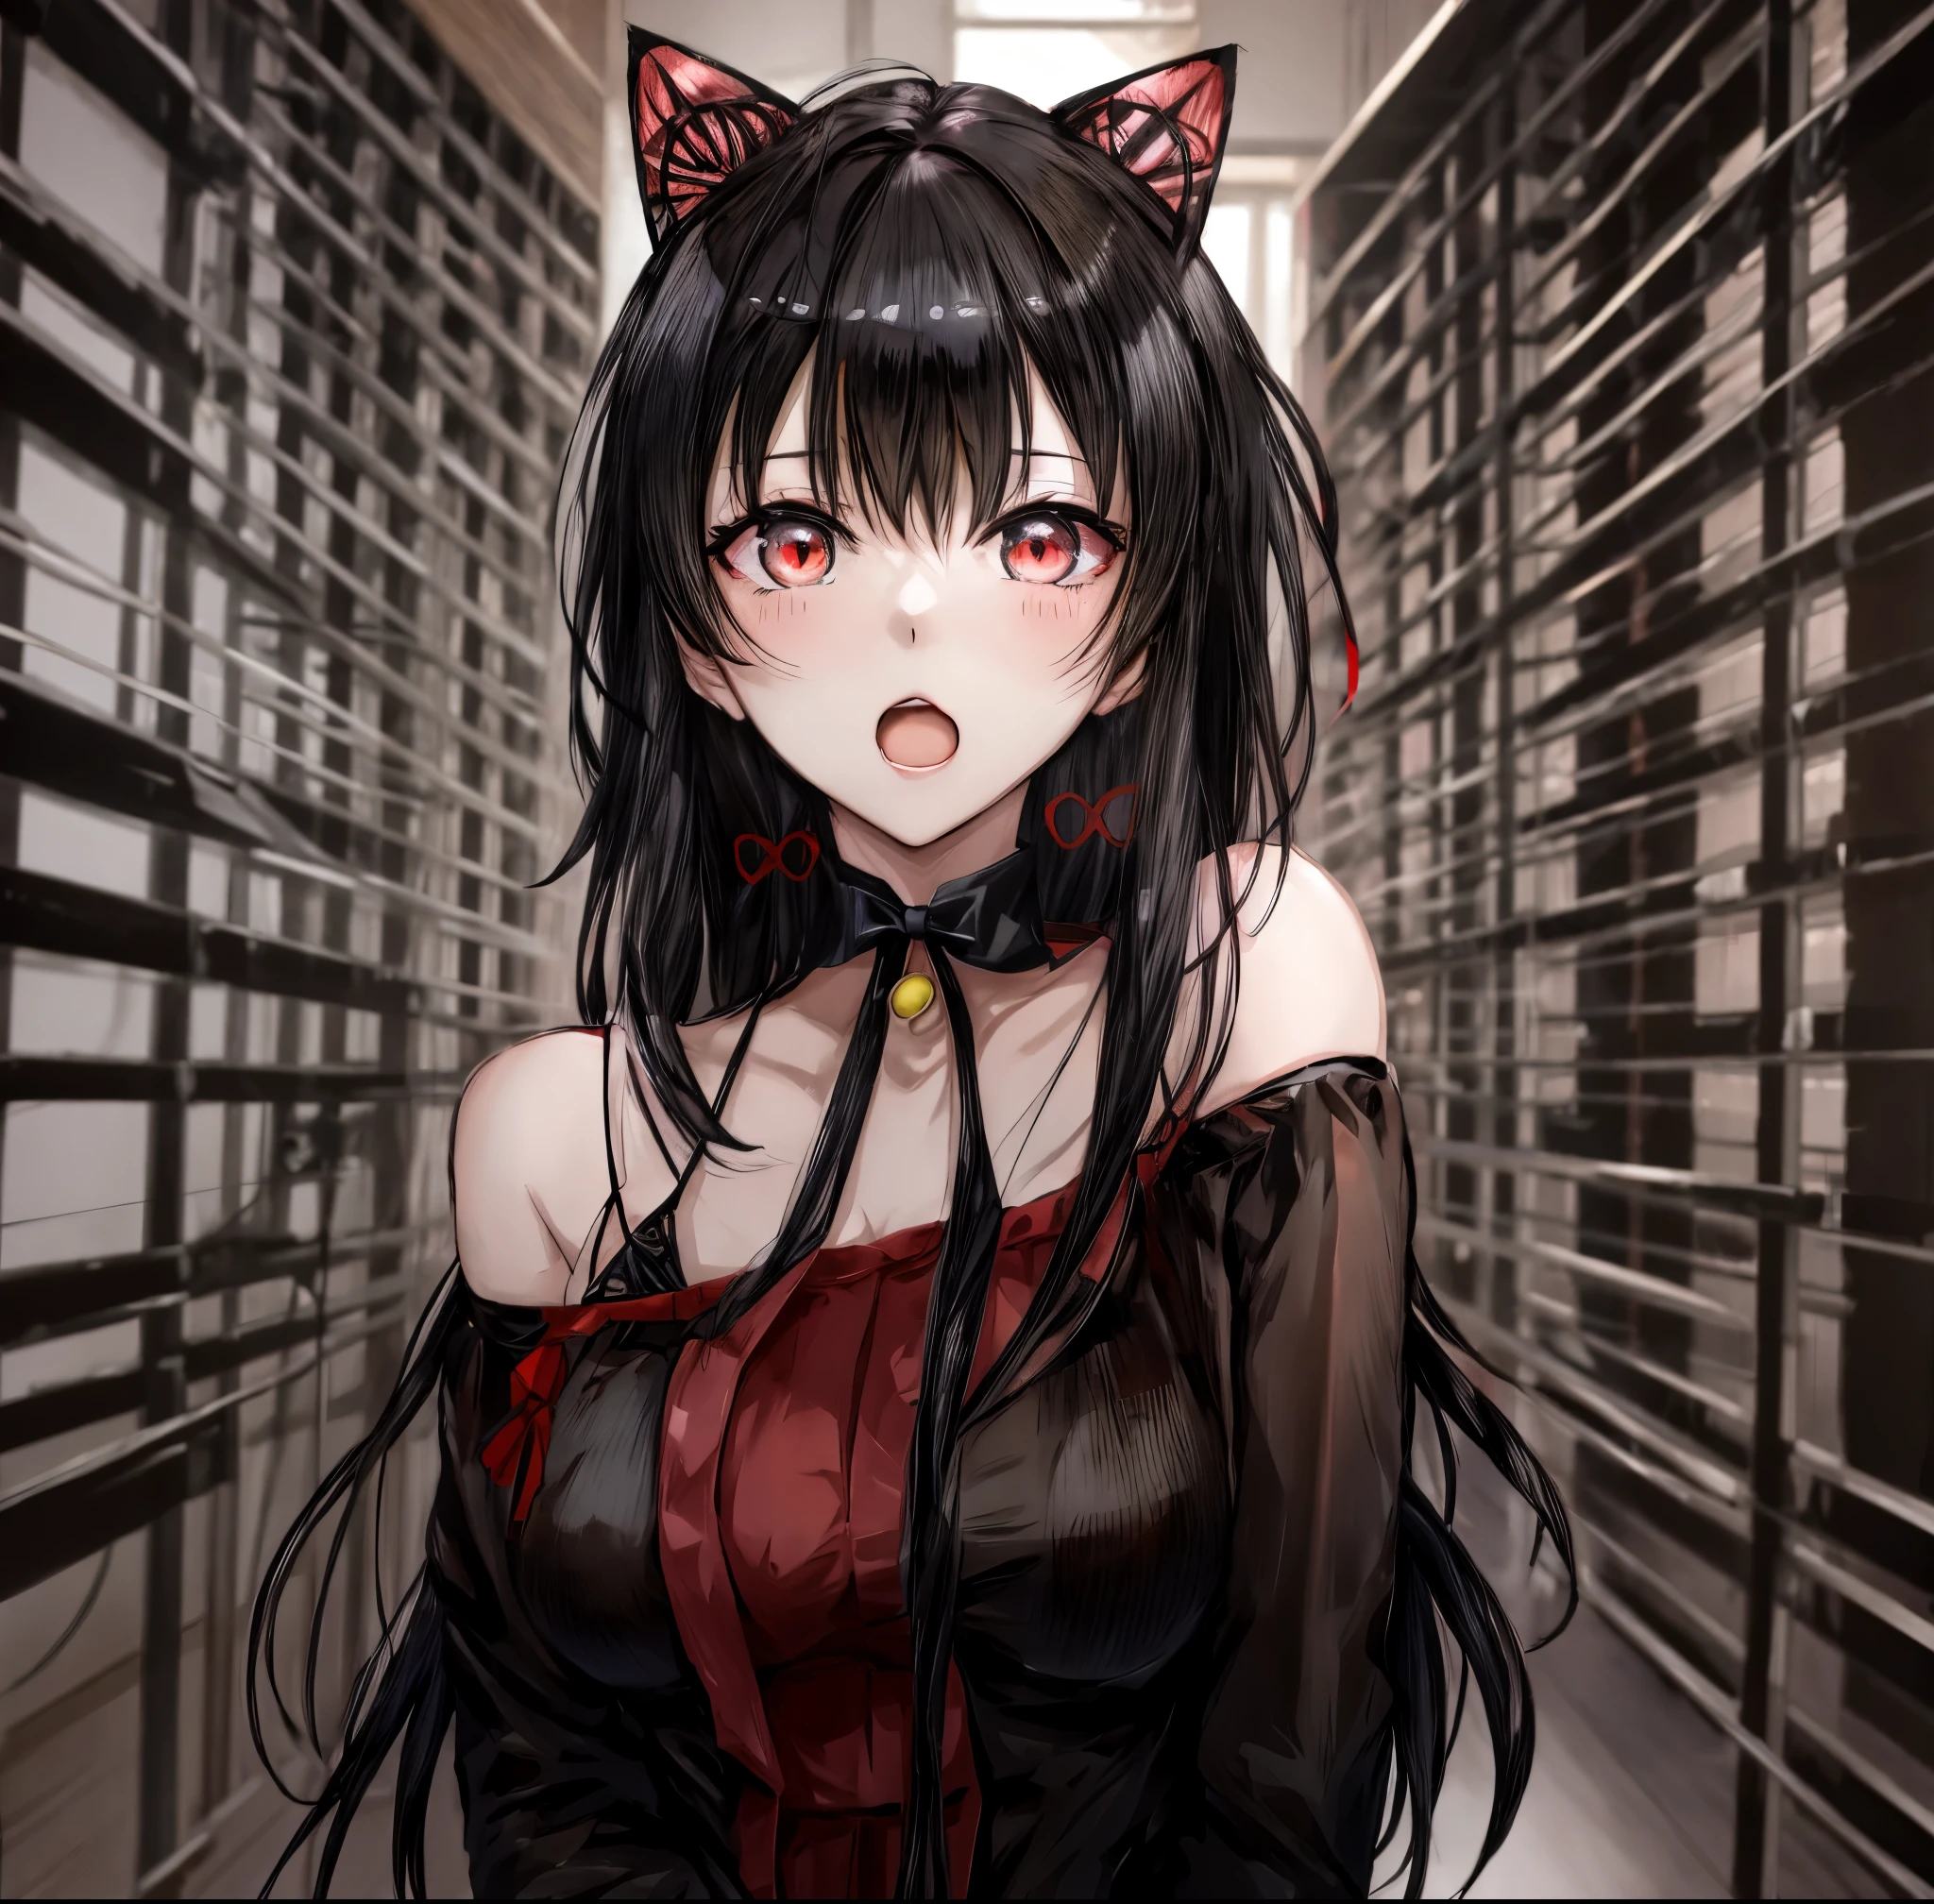 anime girl with black hair and red eyes wearing a red dress, anime girl with cat ears, Rin Tohsaka, beautiful anime catgirl, anime catgirl, cute anime catgirl, cat ears girl, charming cat girl, very beautiful anime cat girl, anime moe art style, an anime girl, anime cat, (anime girl), anime girl, seductive anime girl